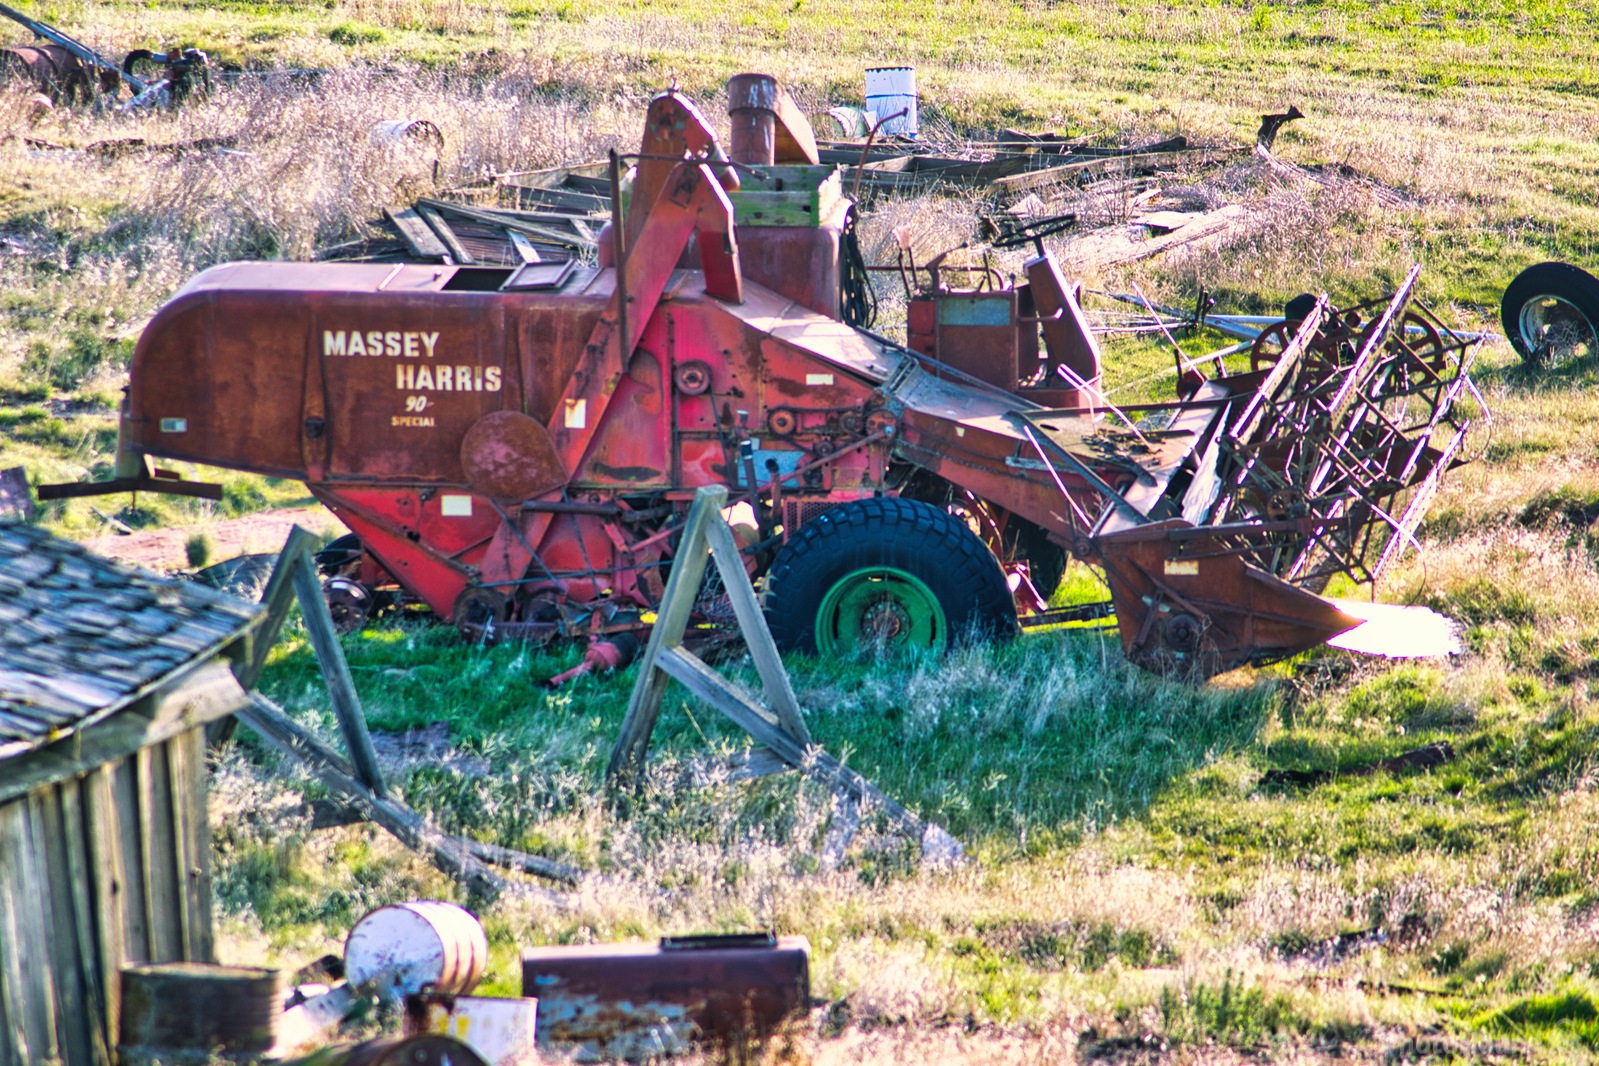 Image of Old Red REO Truck and Harvester by Steve West